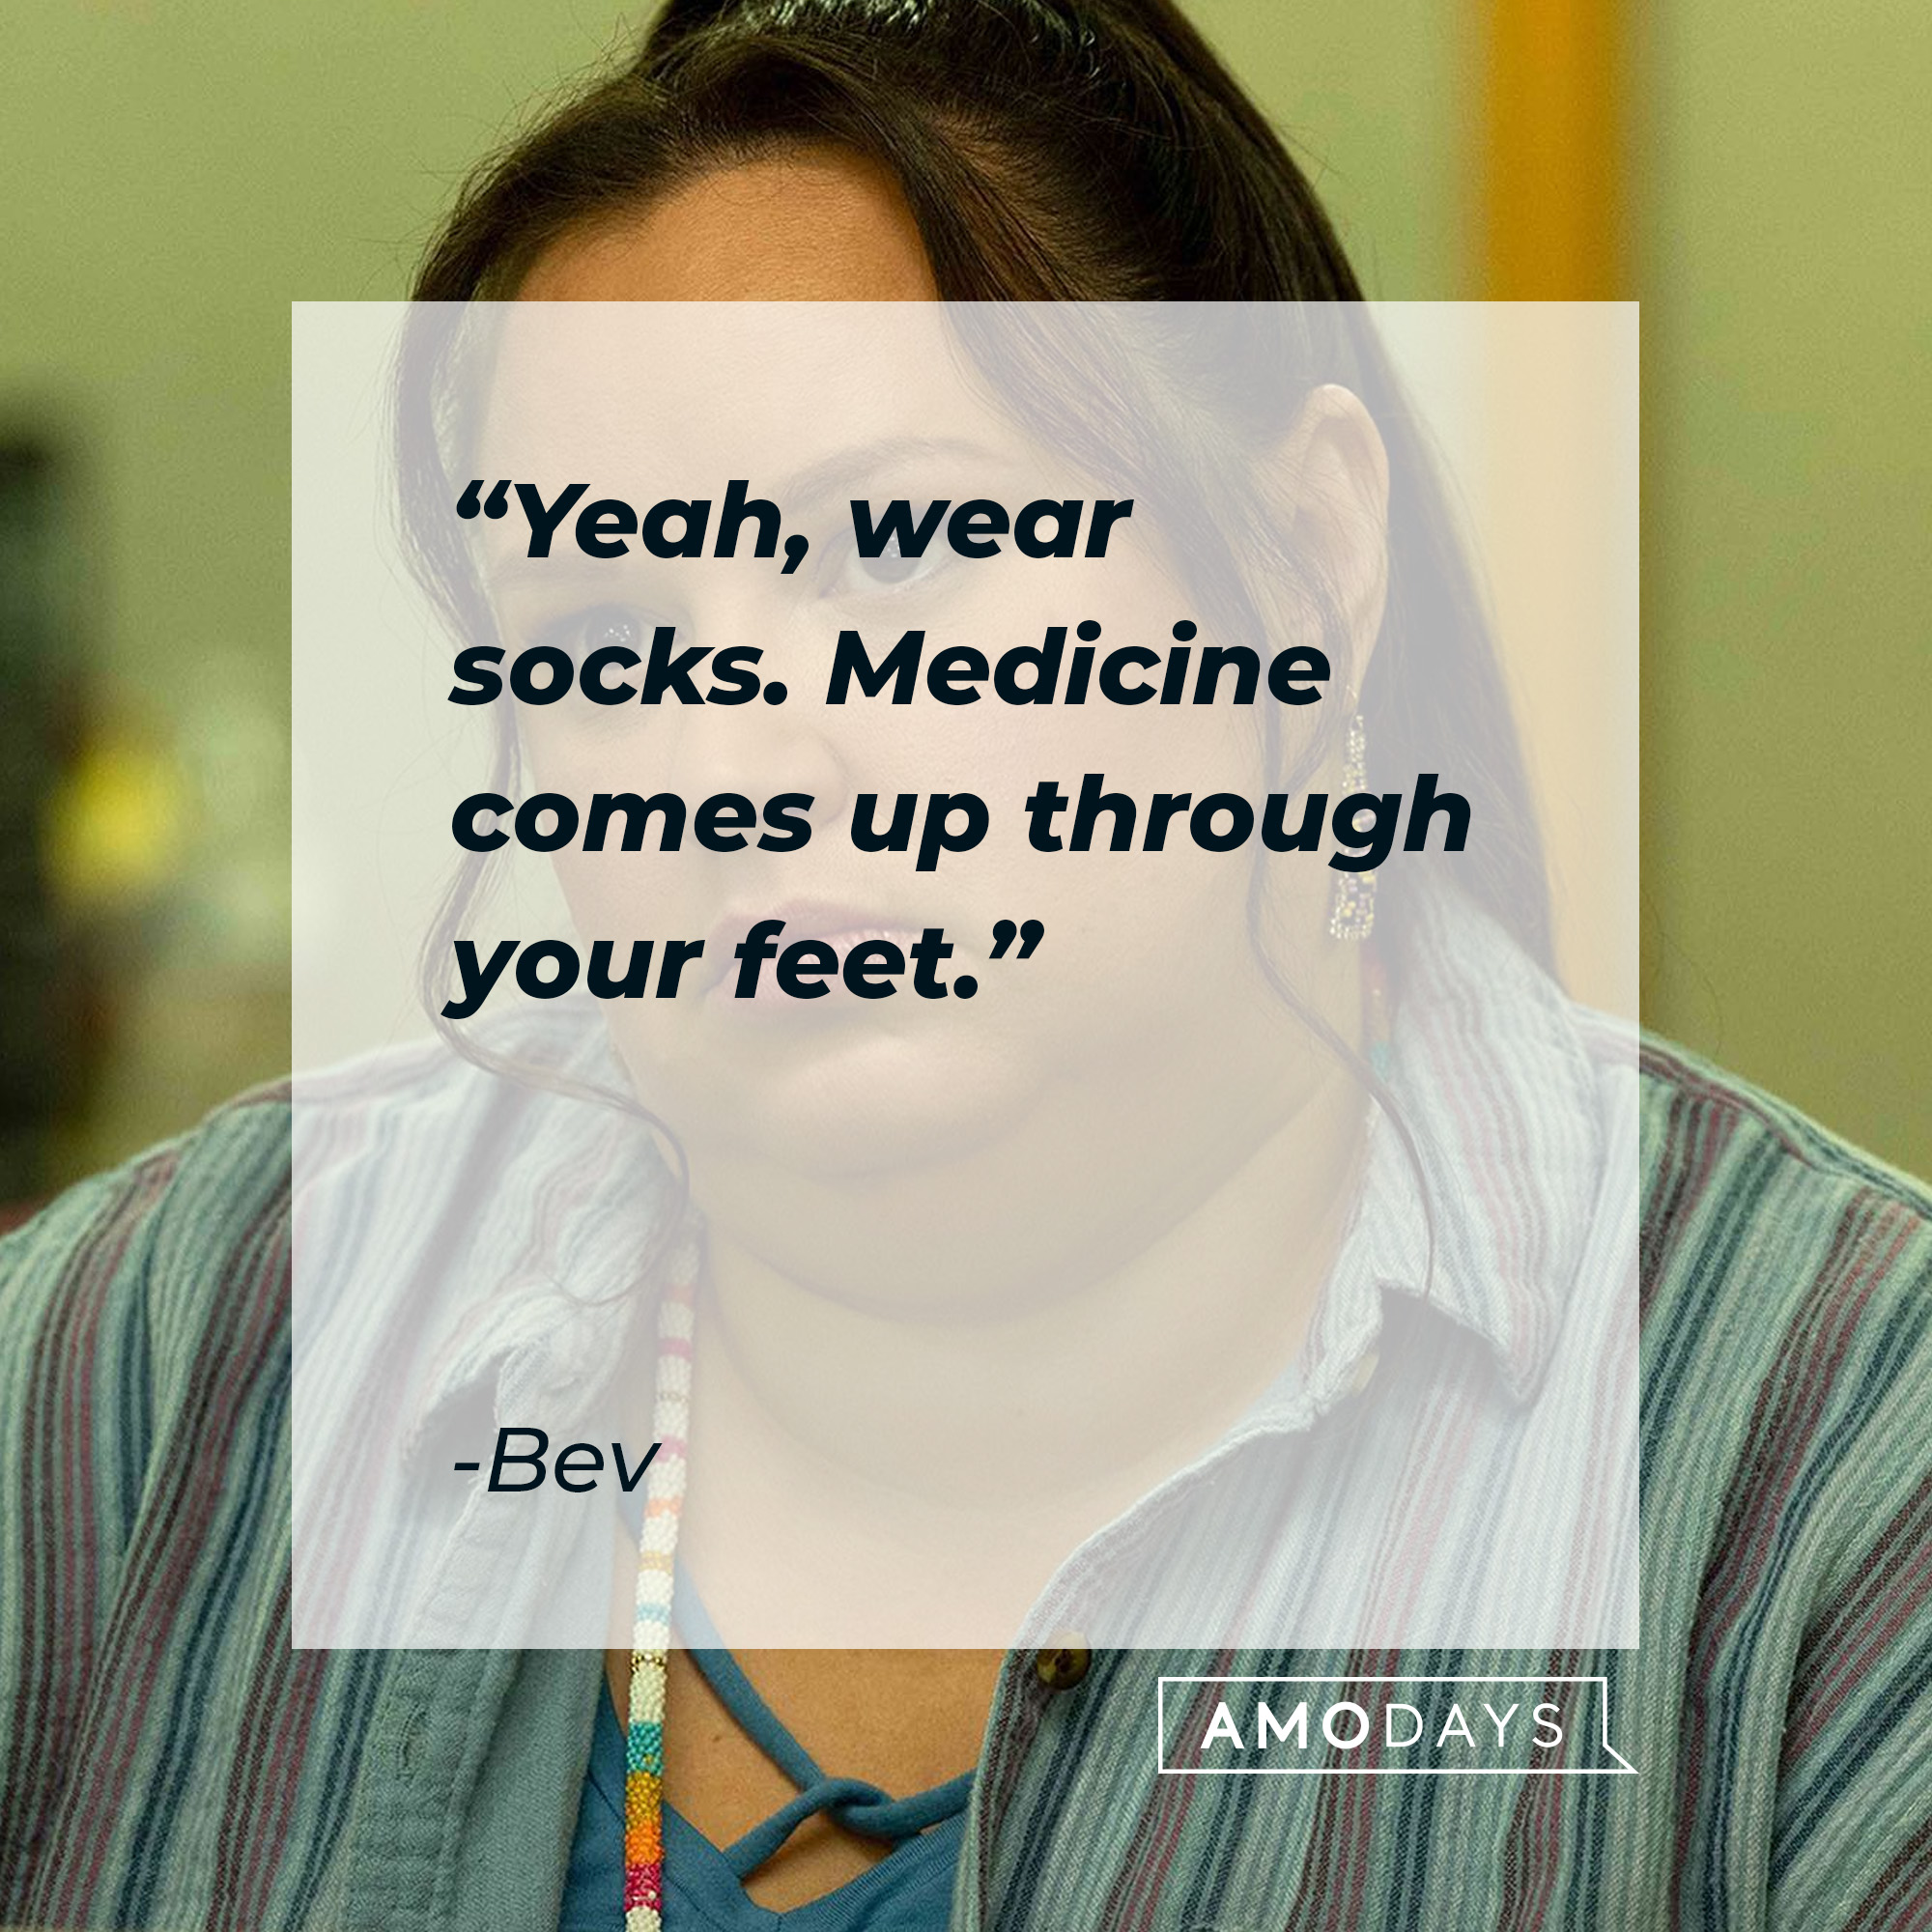 Bev, with her quote: "Yeah, wear socks. Medicine comes up through your feet." | Source: Facebook.com/RezDogsFX